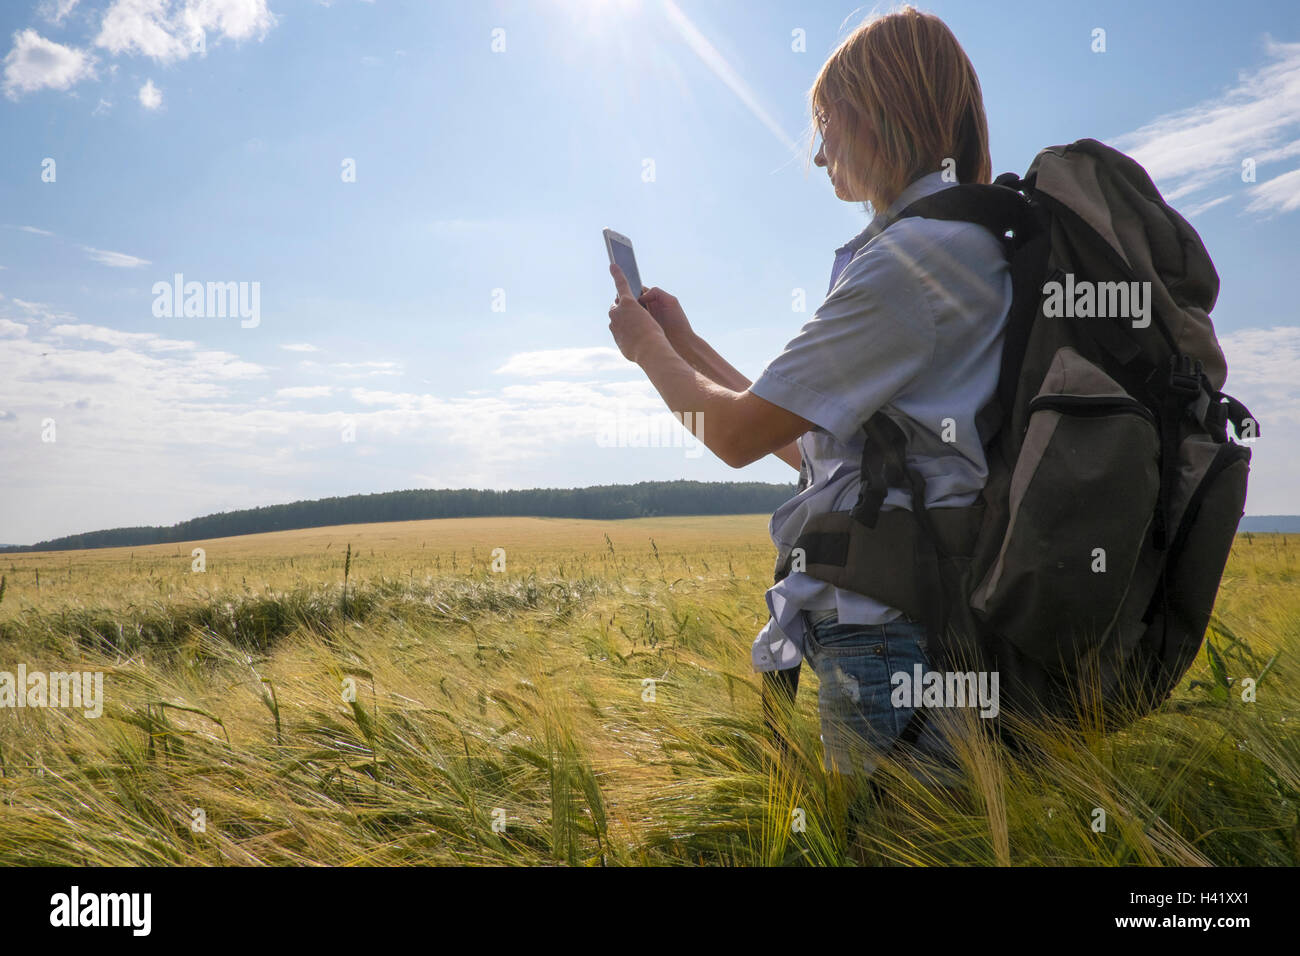 Caucasian woman standing in field using cell phone Banque D'Images